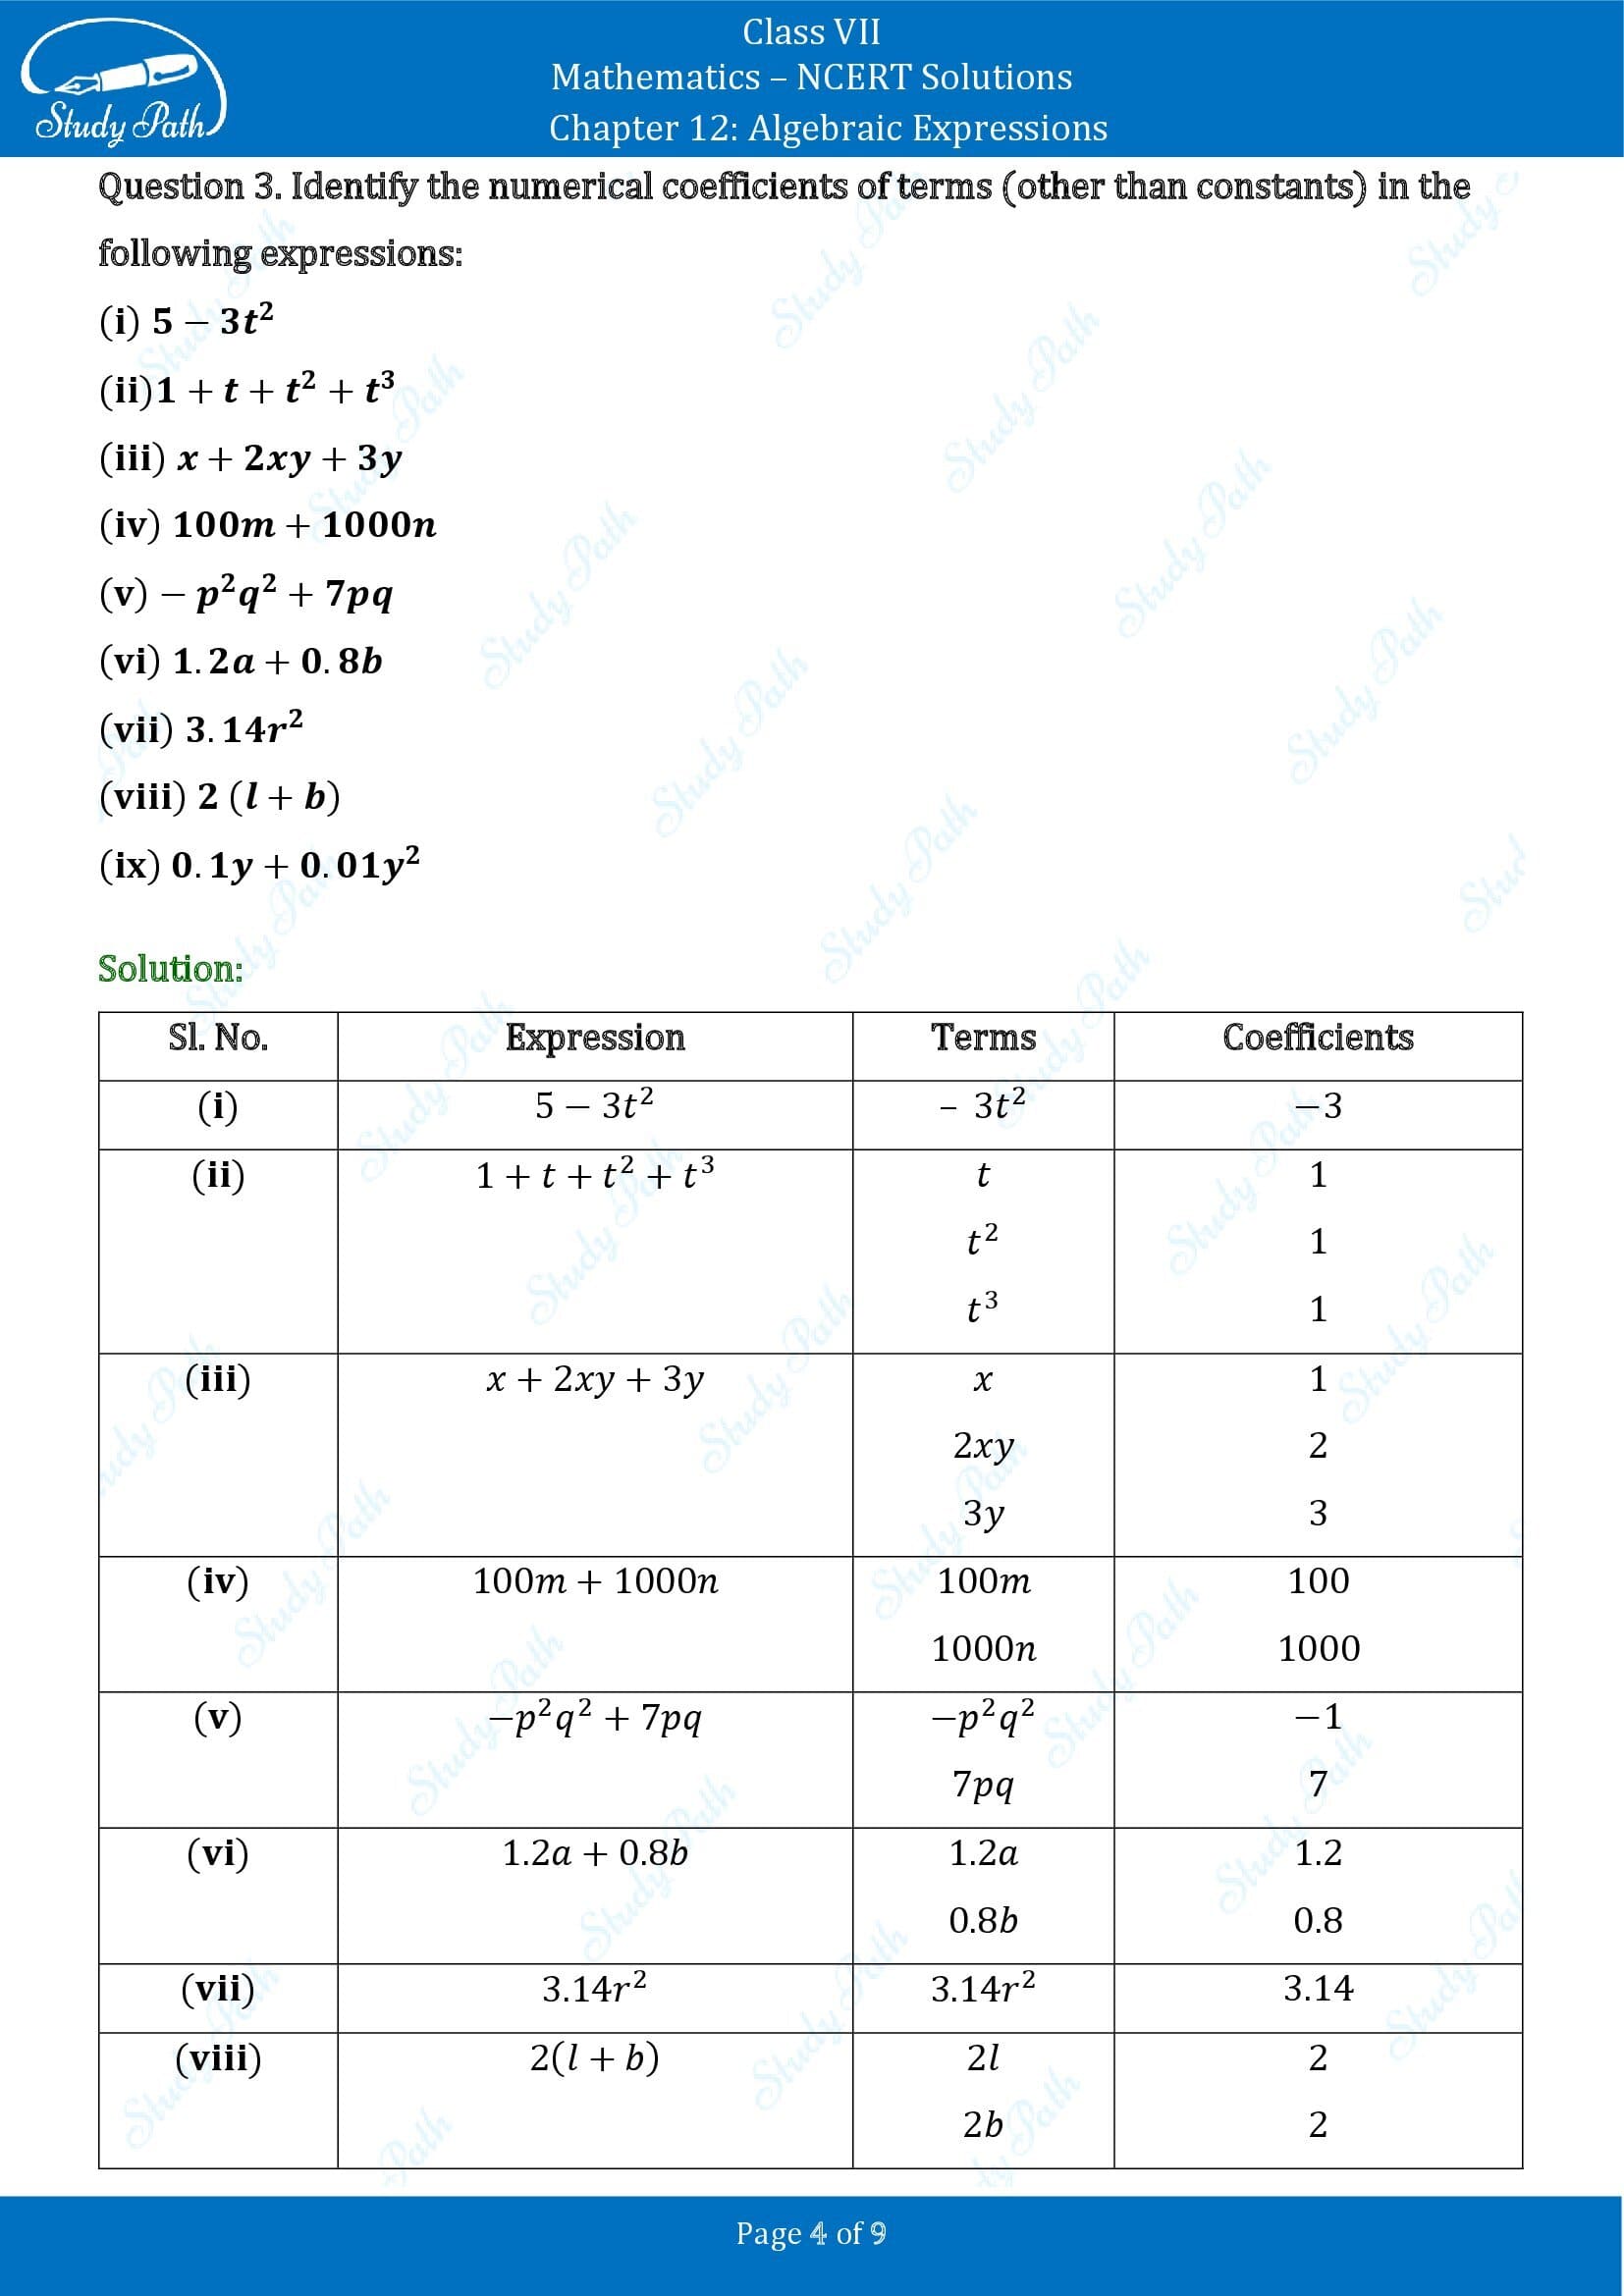 NCERT Solutions for Class 7 Maths Chapter 12 Algebraic Expressions Exercise 12.1 00004